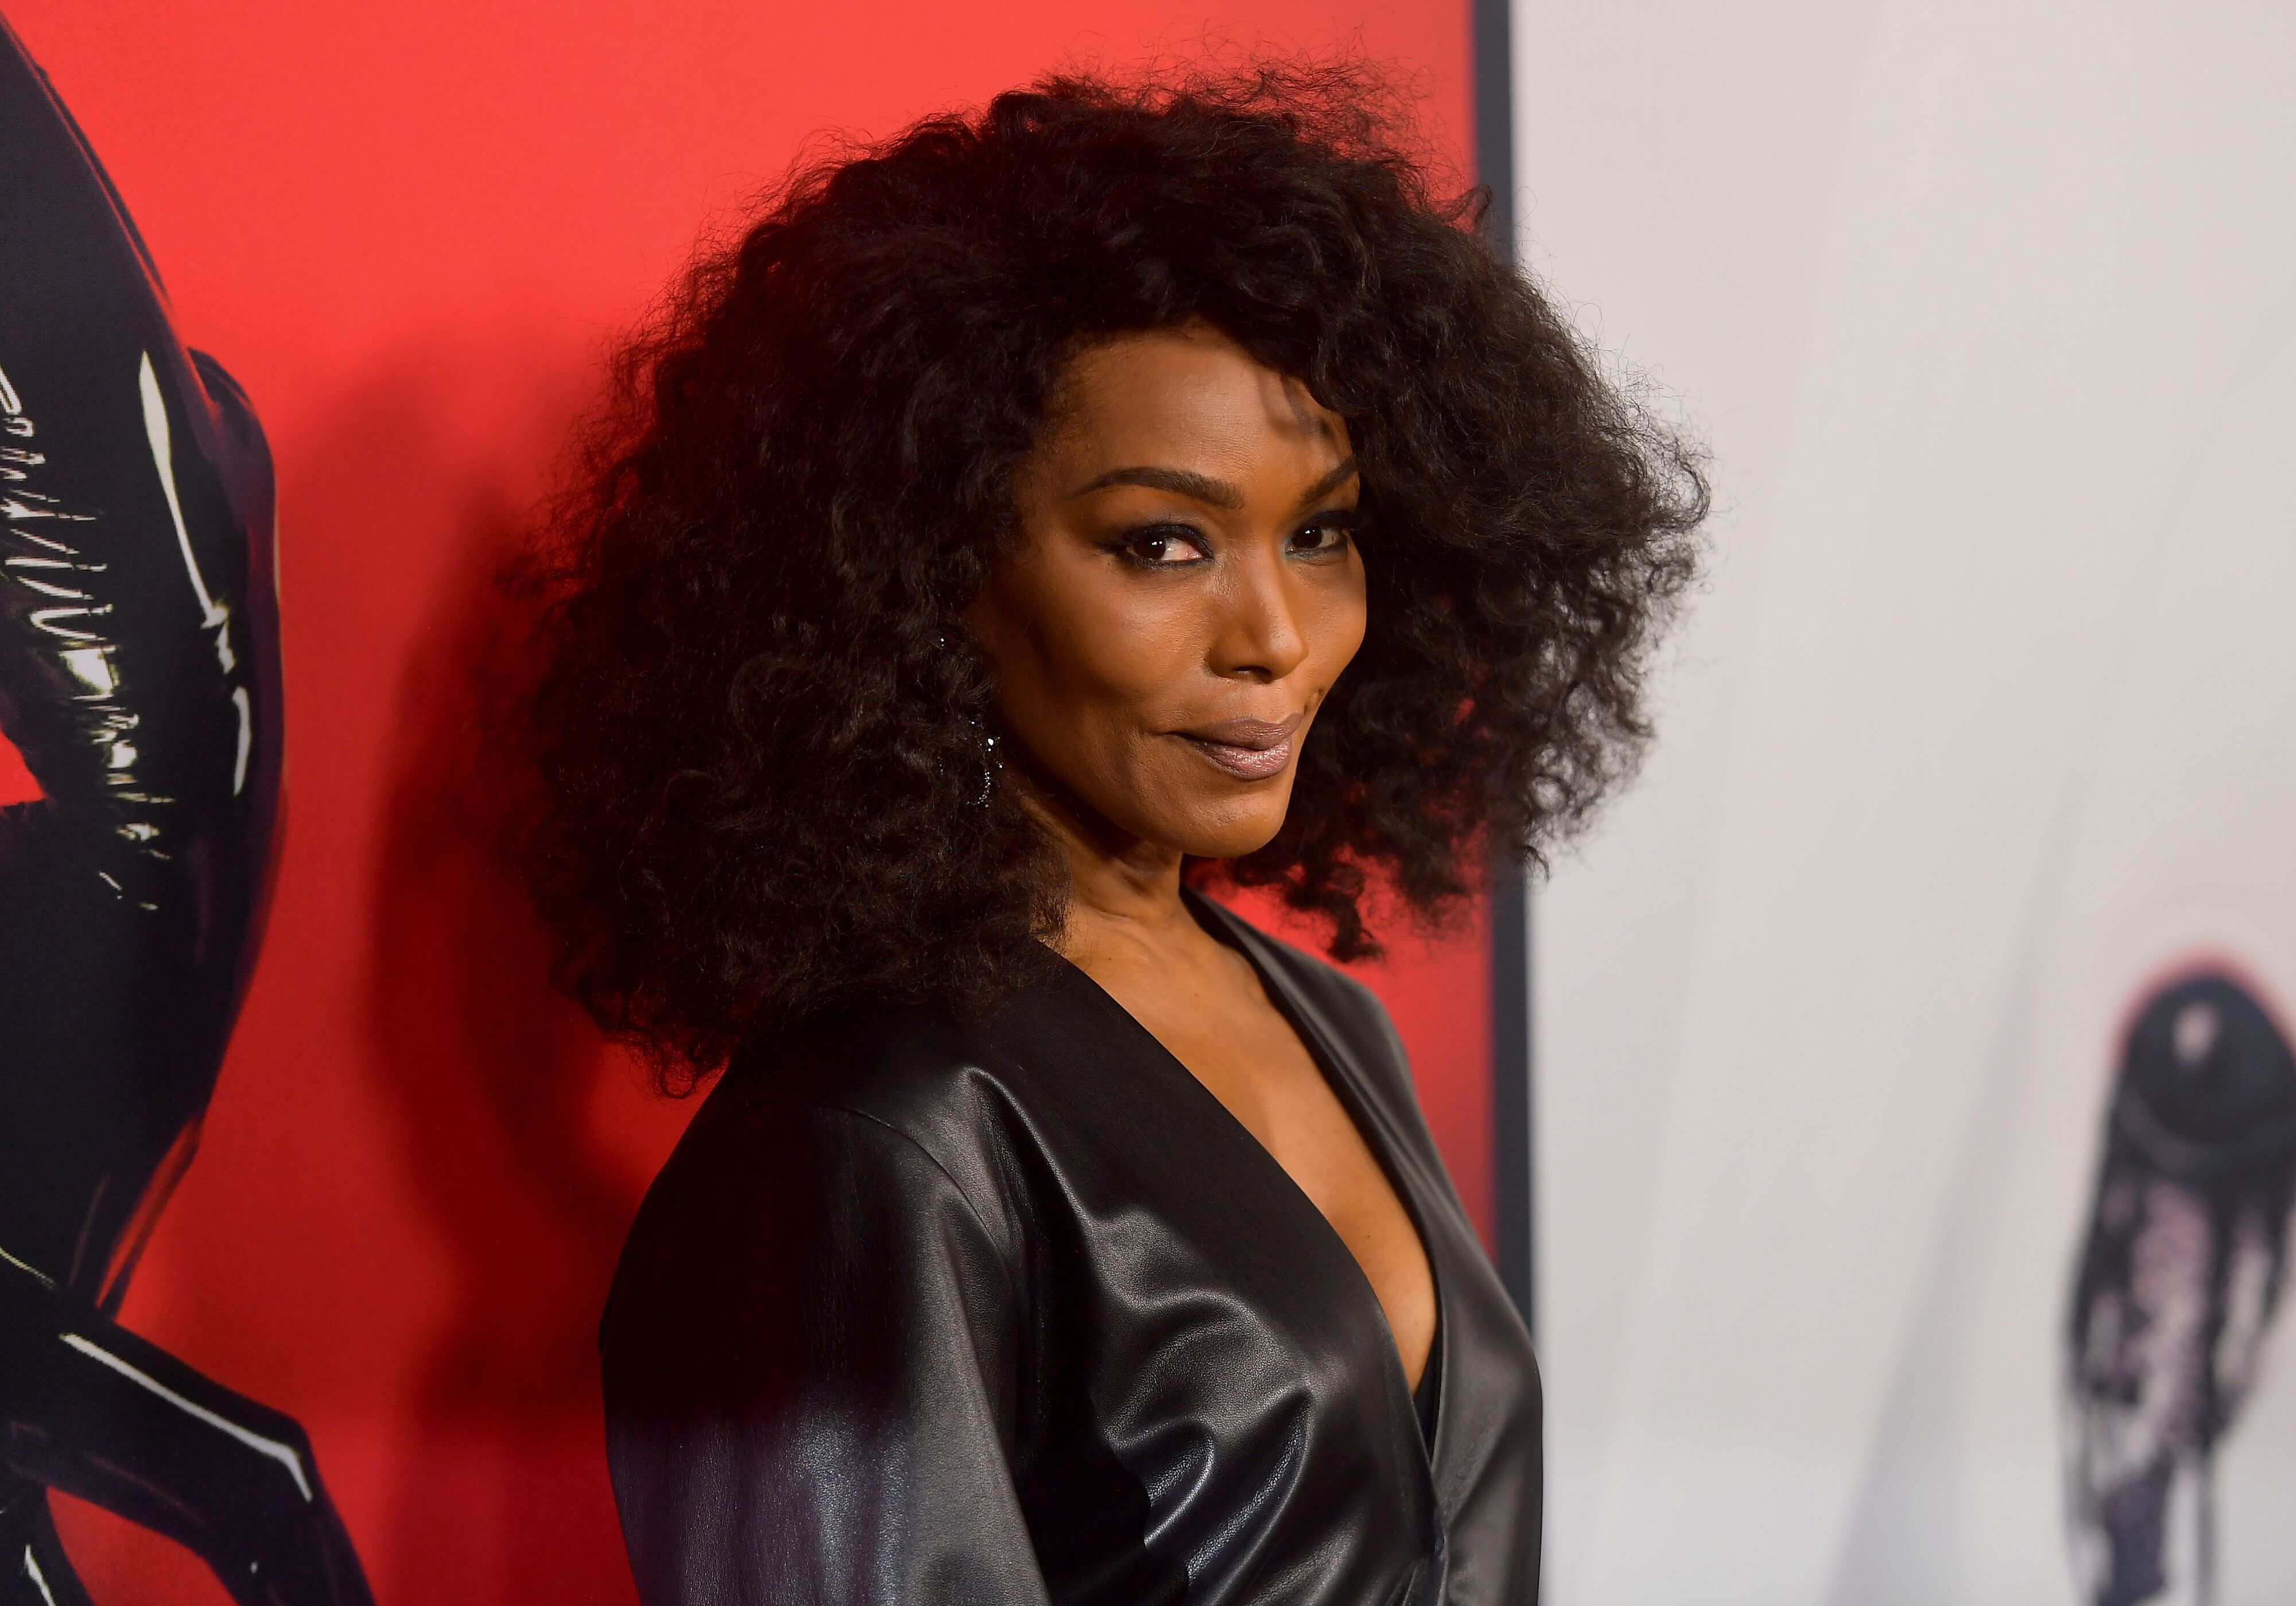 Angela Bassett at the 100th Episode celebration of "American Horror Story" | Source: Getty Images